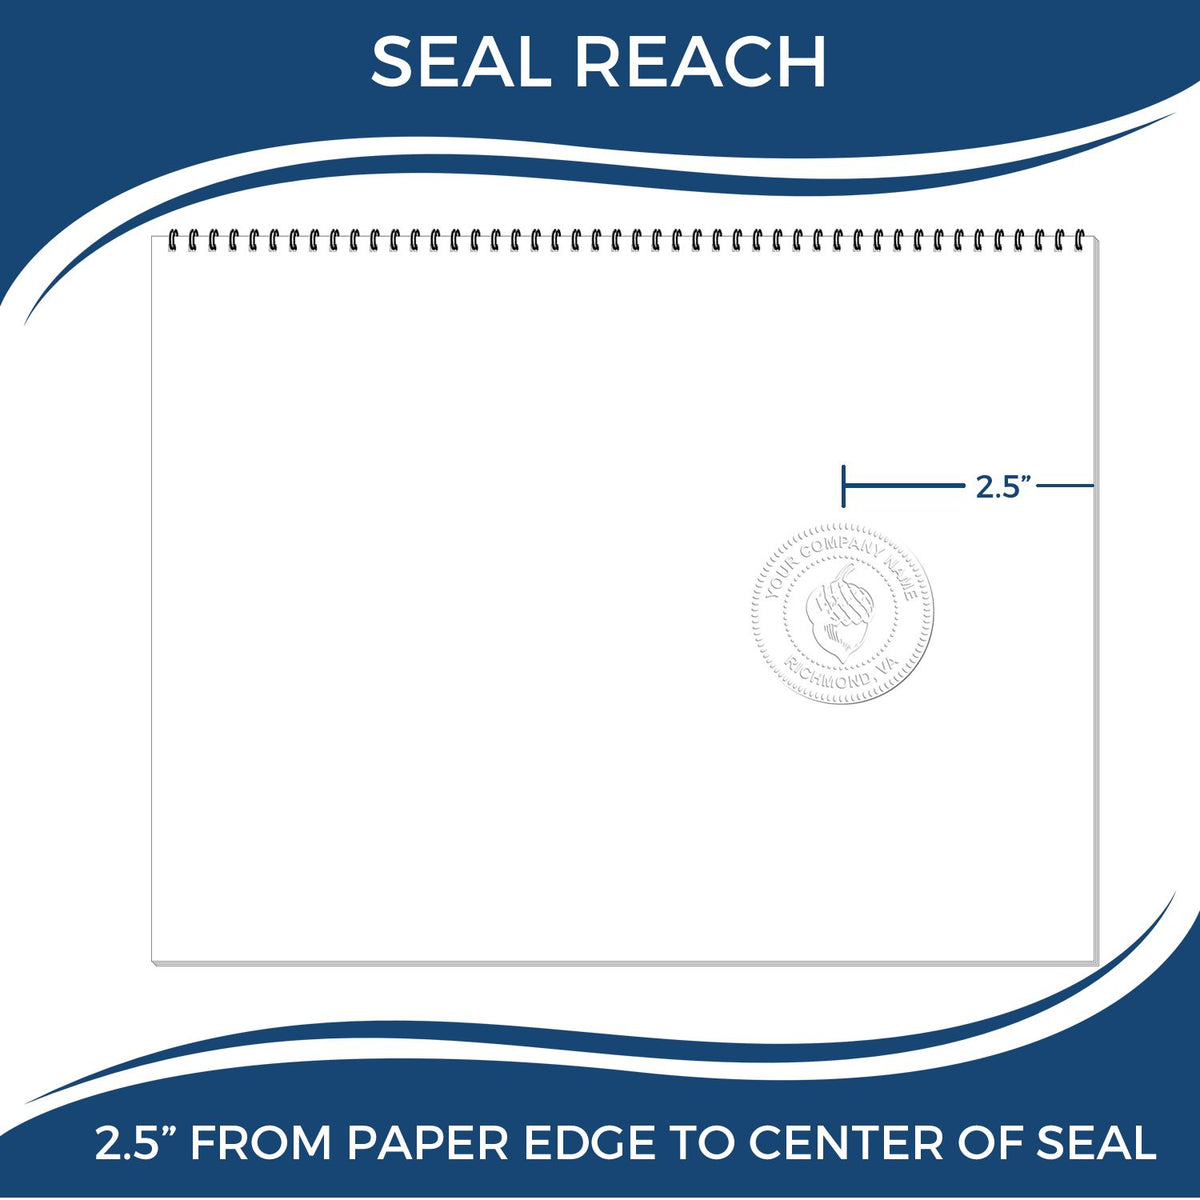 An infographic showing the seal reach which is represented by a ruler and a miniature seal image of the Heavy Duty Cast Iron Arizona Geologist Seal Embosser